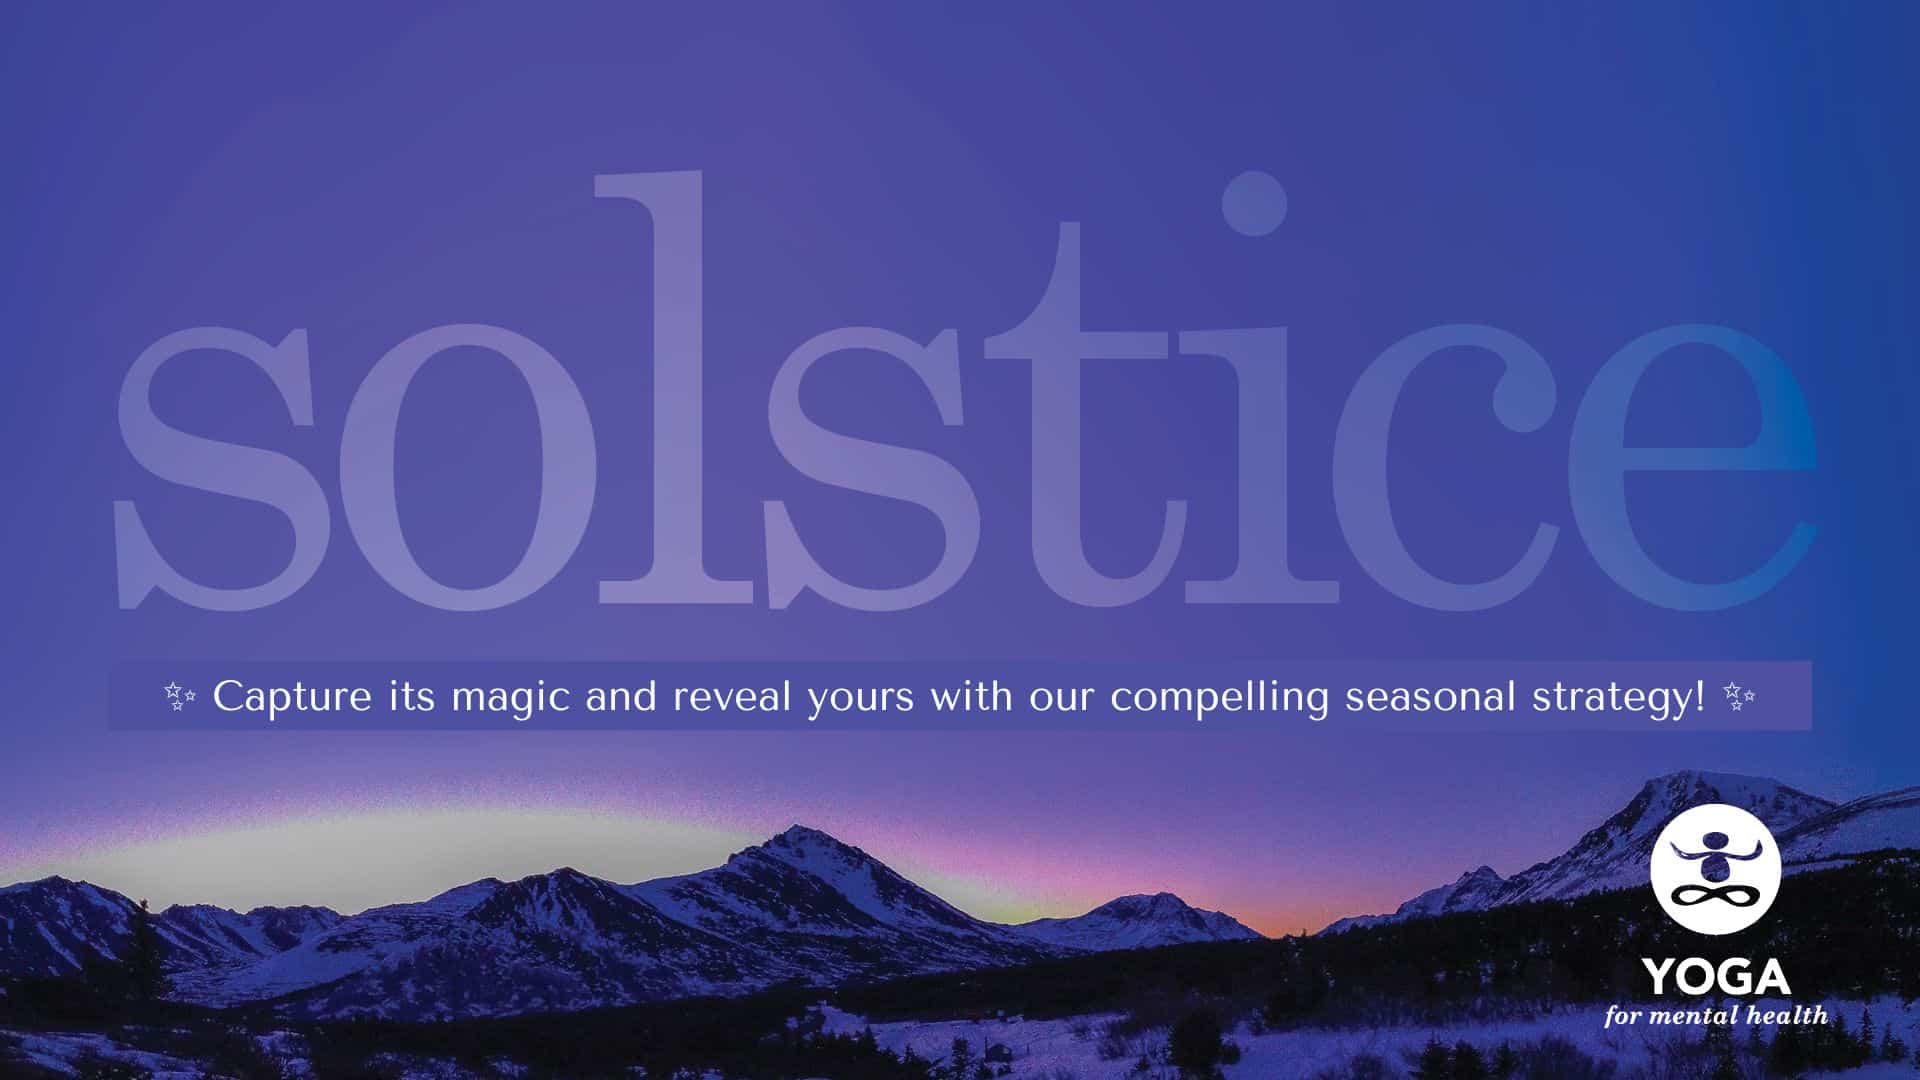 Winter Solstice capture its magic and reveal yours with our compelling seasonal strategy